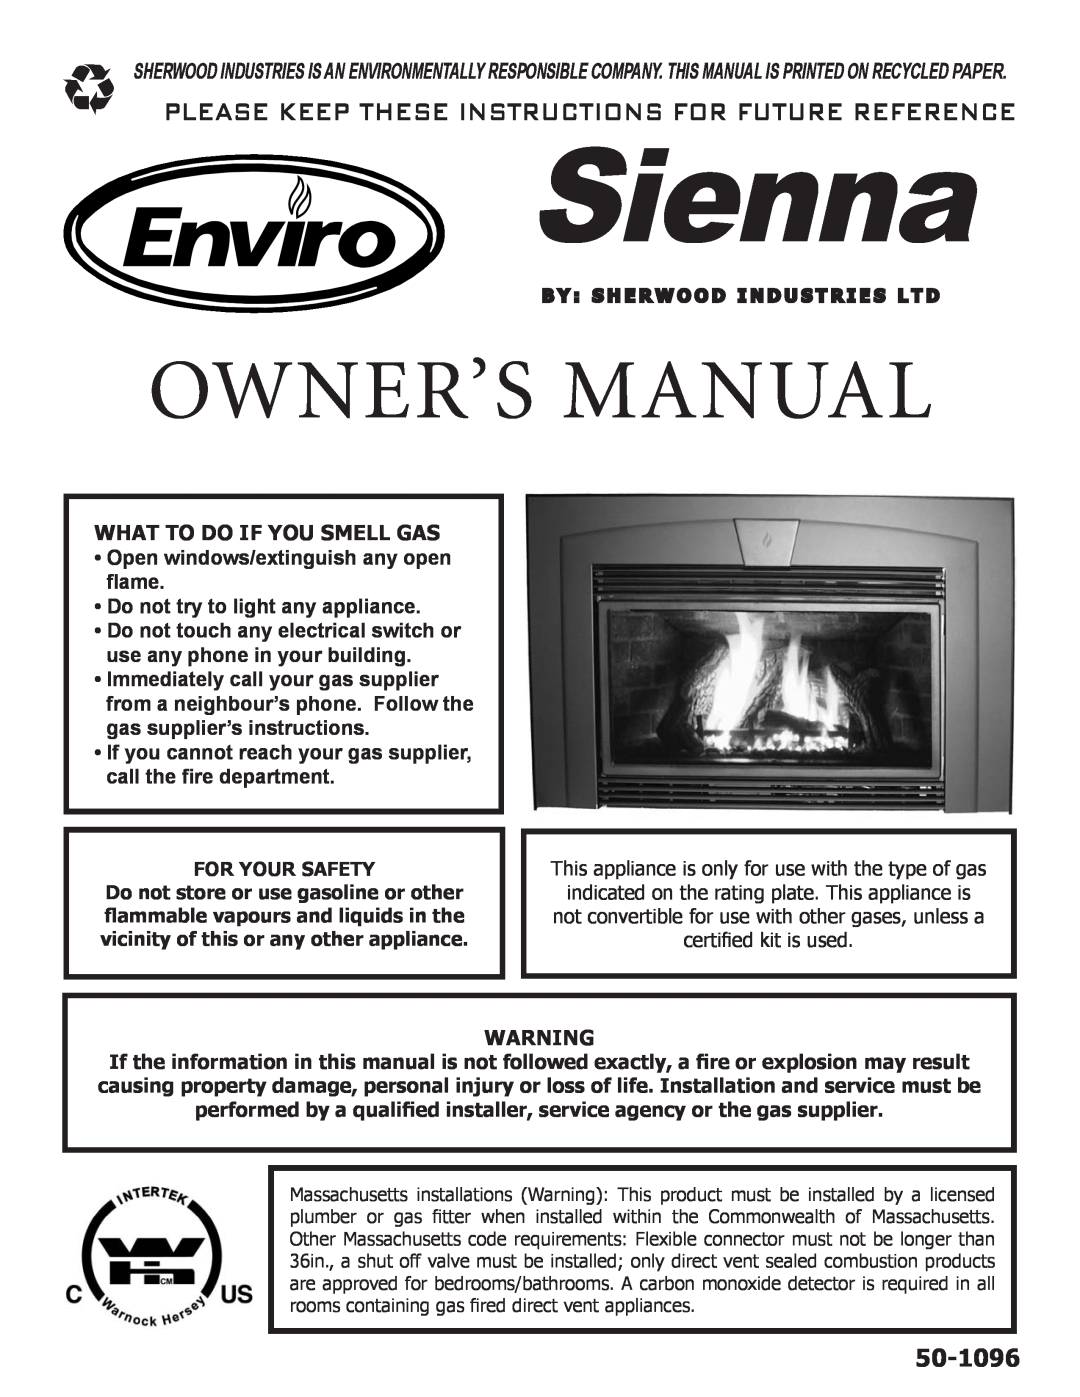 Enviro Indoor Gas Fireplace owner manual What To Do If You Smell Gas, For Your Safety, Sienna, 50-1096 